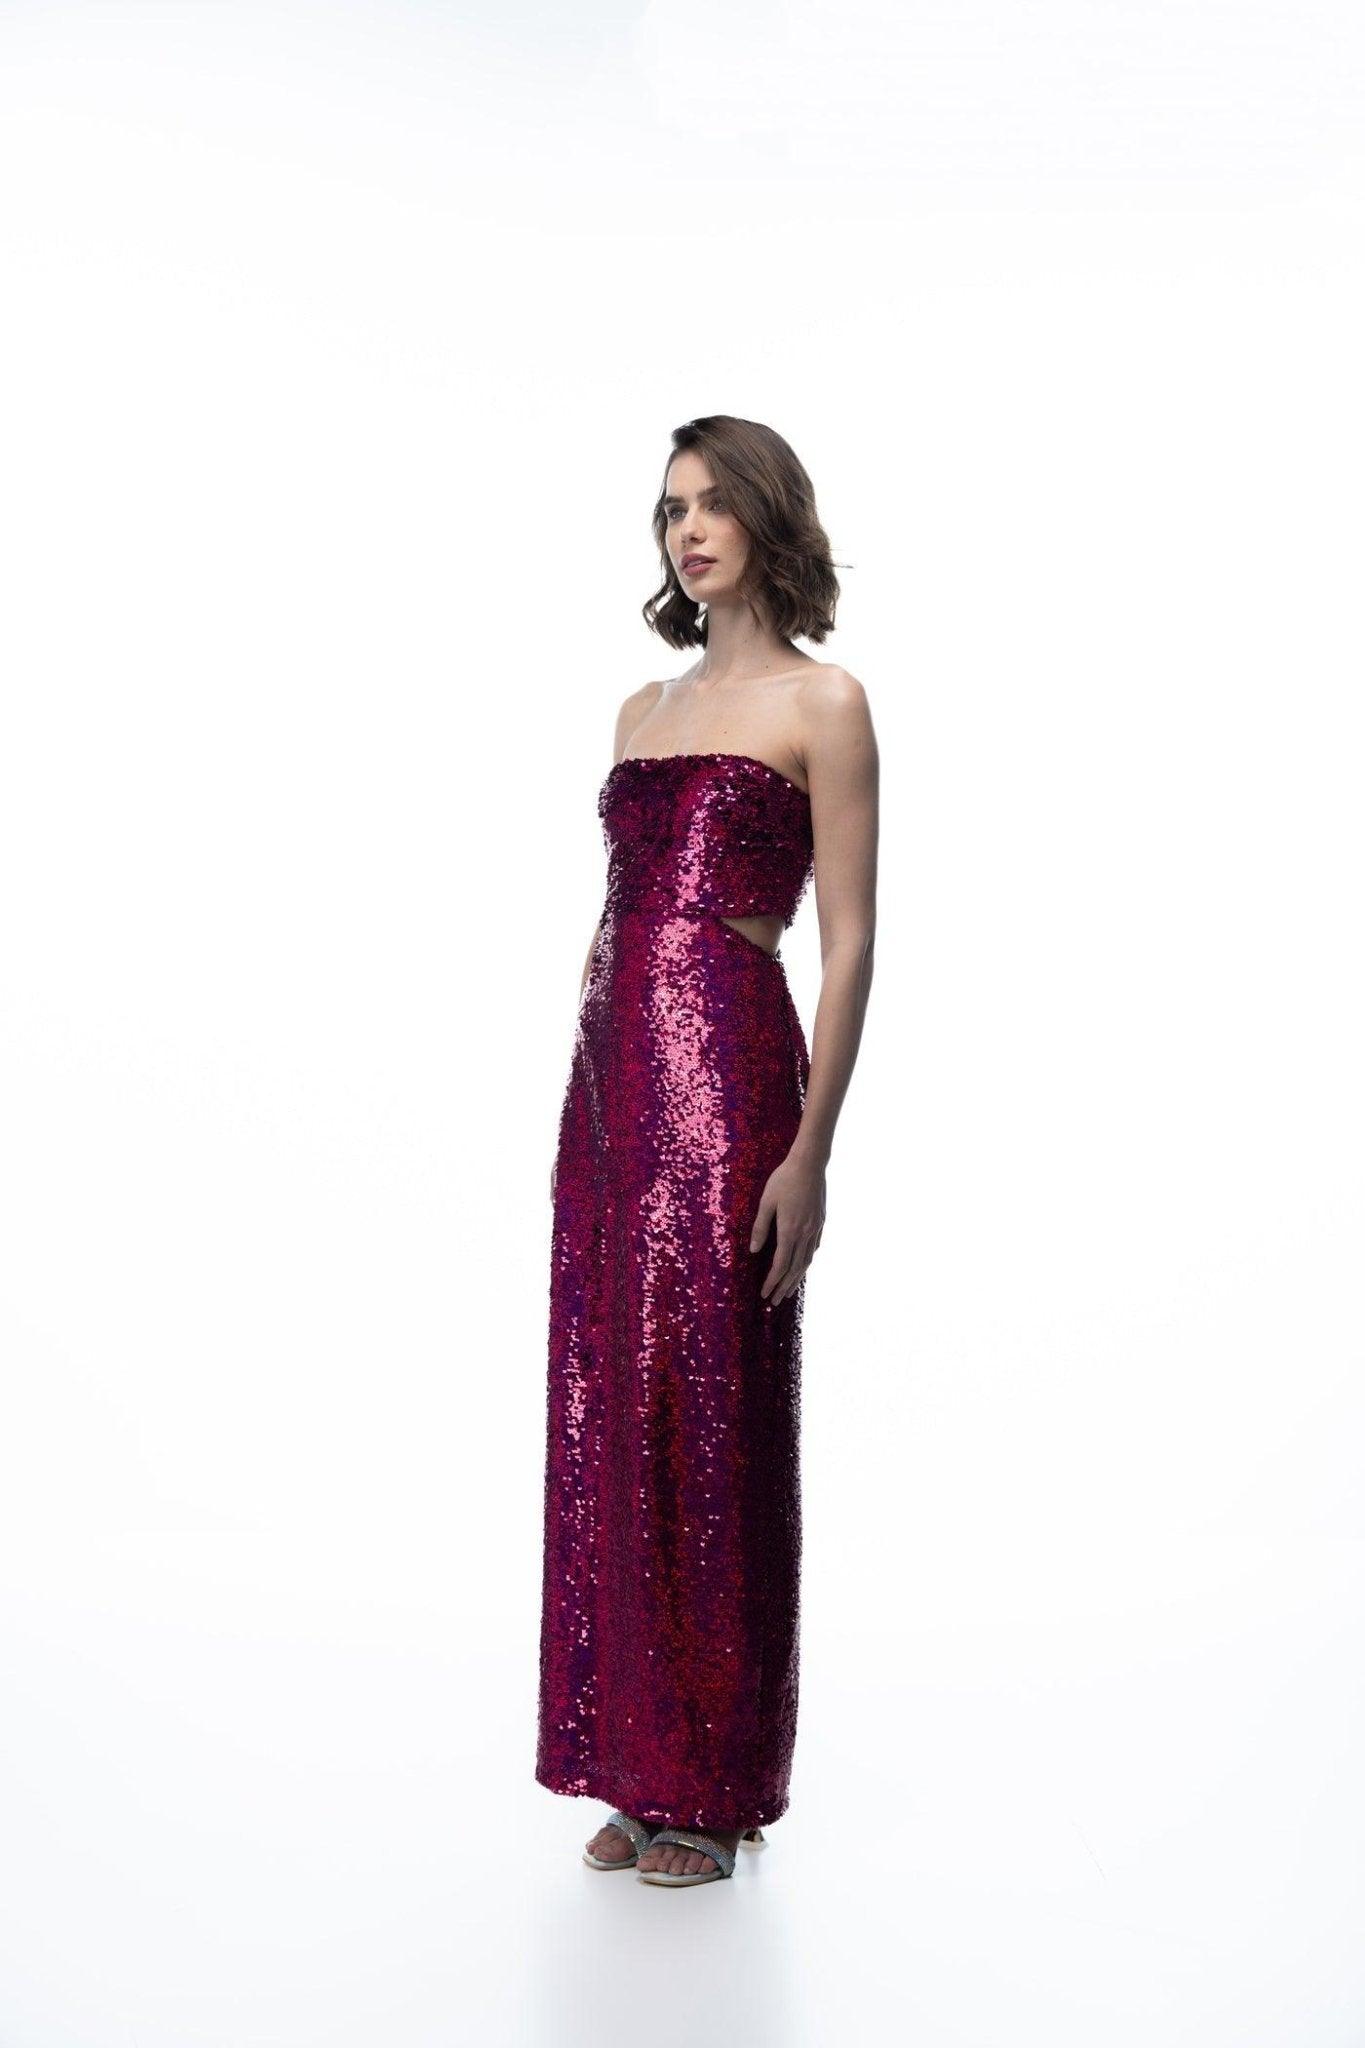 PINK SEQUIN STRAPLESS DRESS WITH CUTOUTS - Sotbella